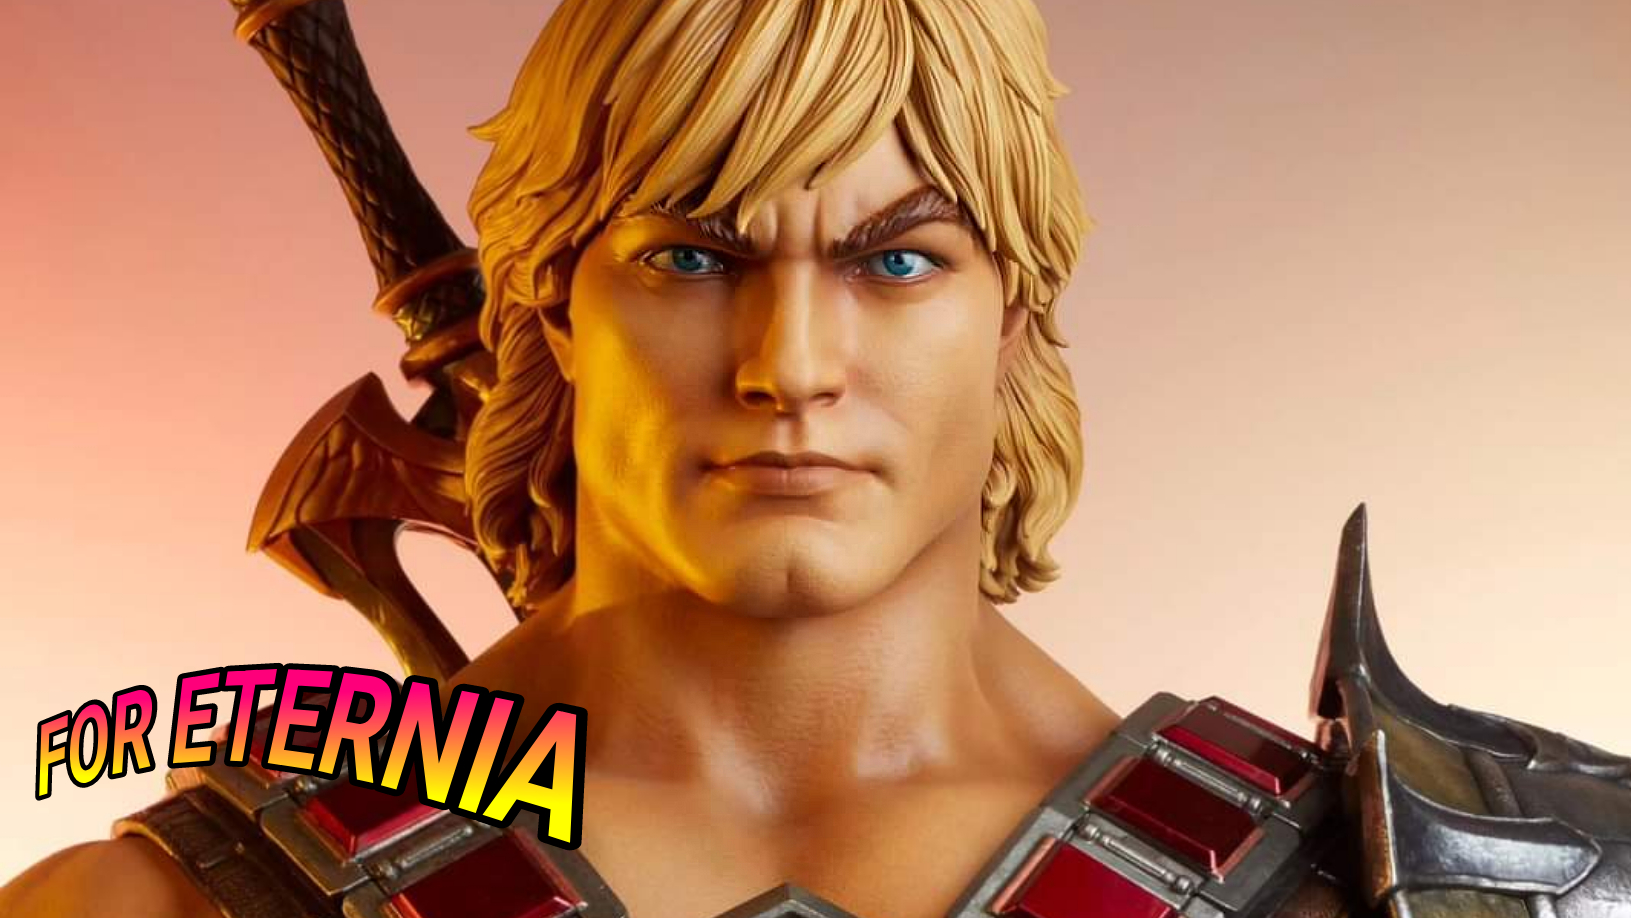 He-Man ”Legends” Life-Size bust now available for pre-order from Tweeterhead